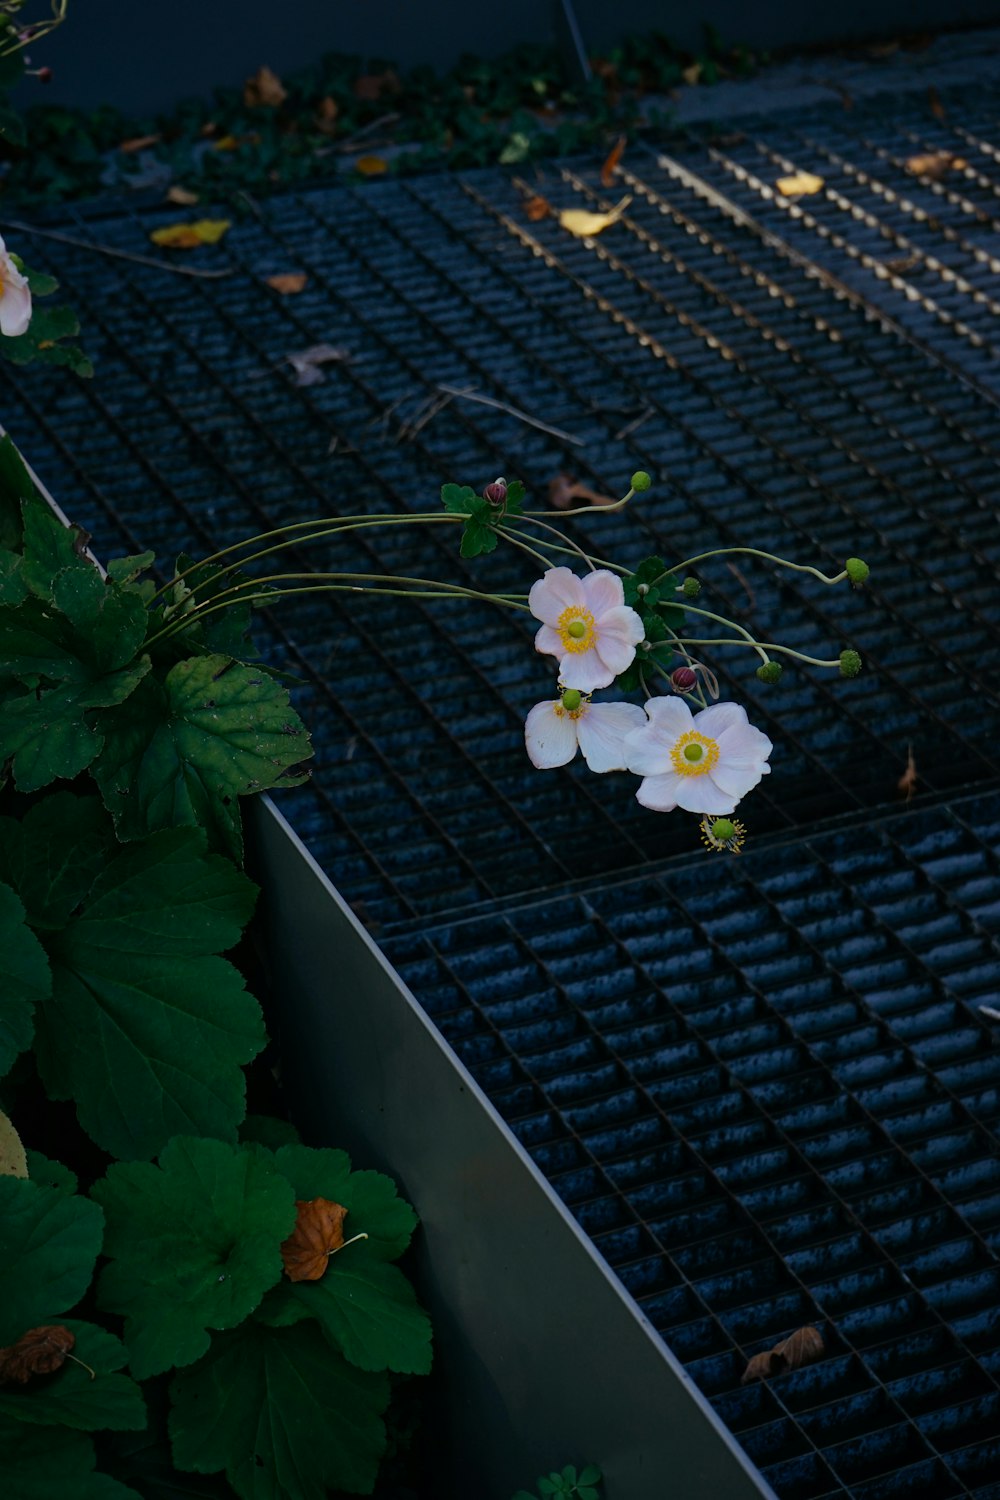 a group of flowers on a metal surface